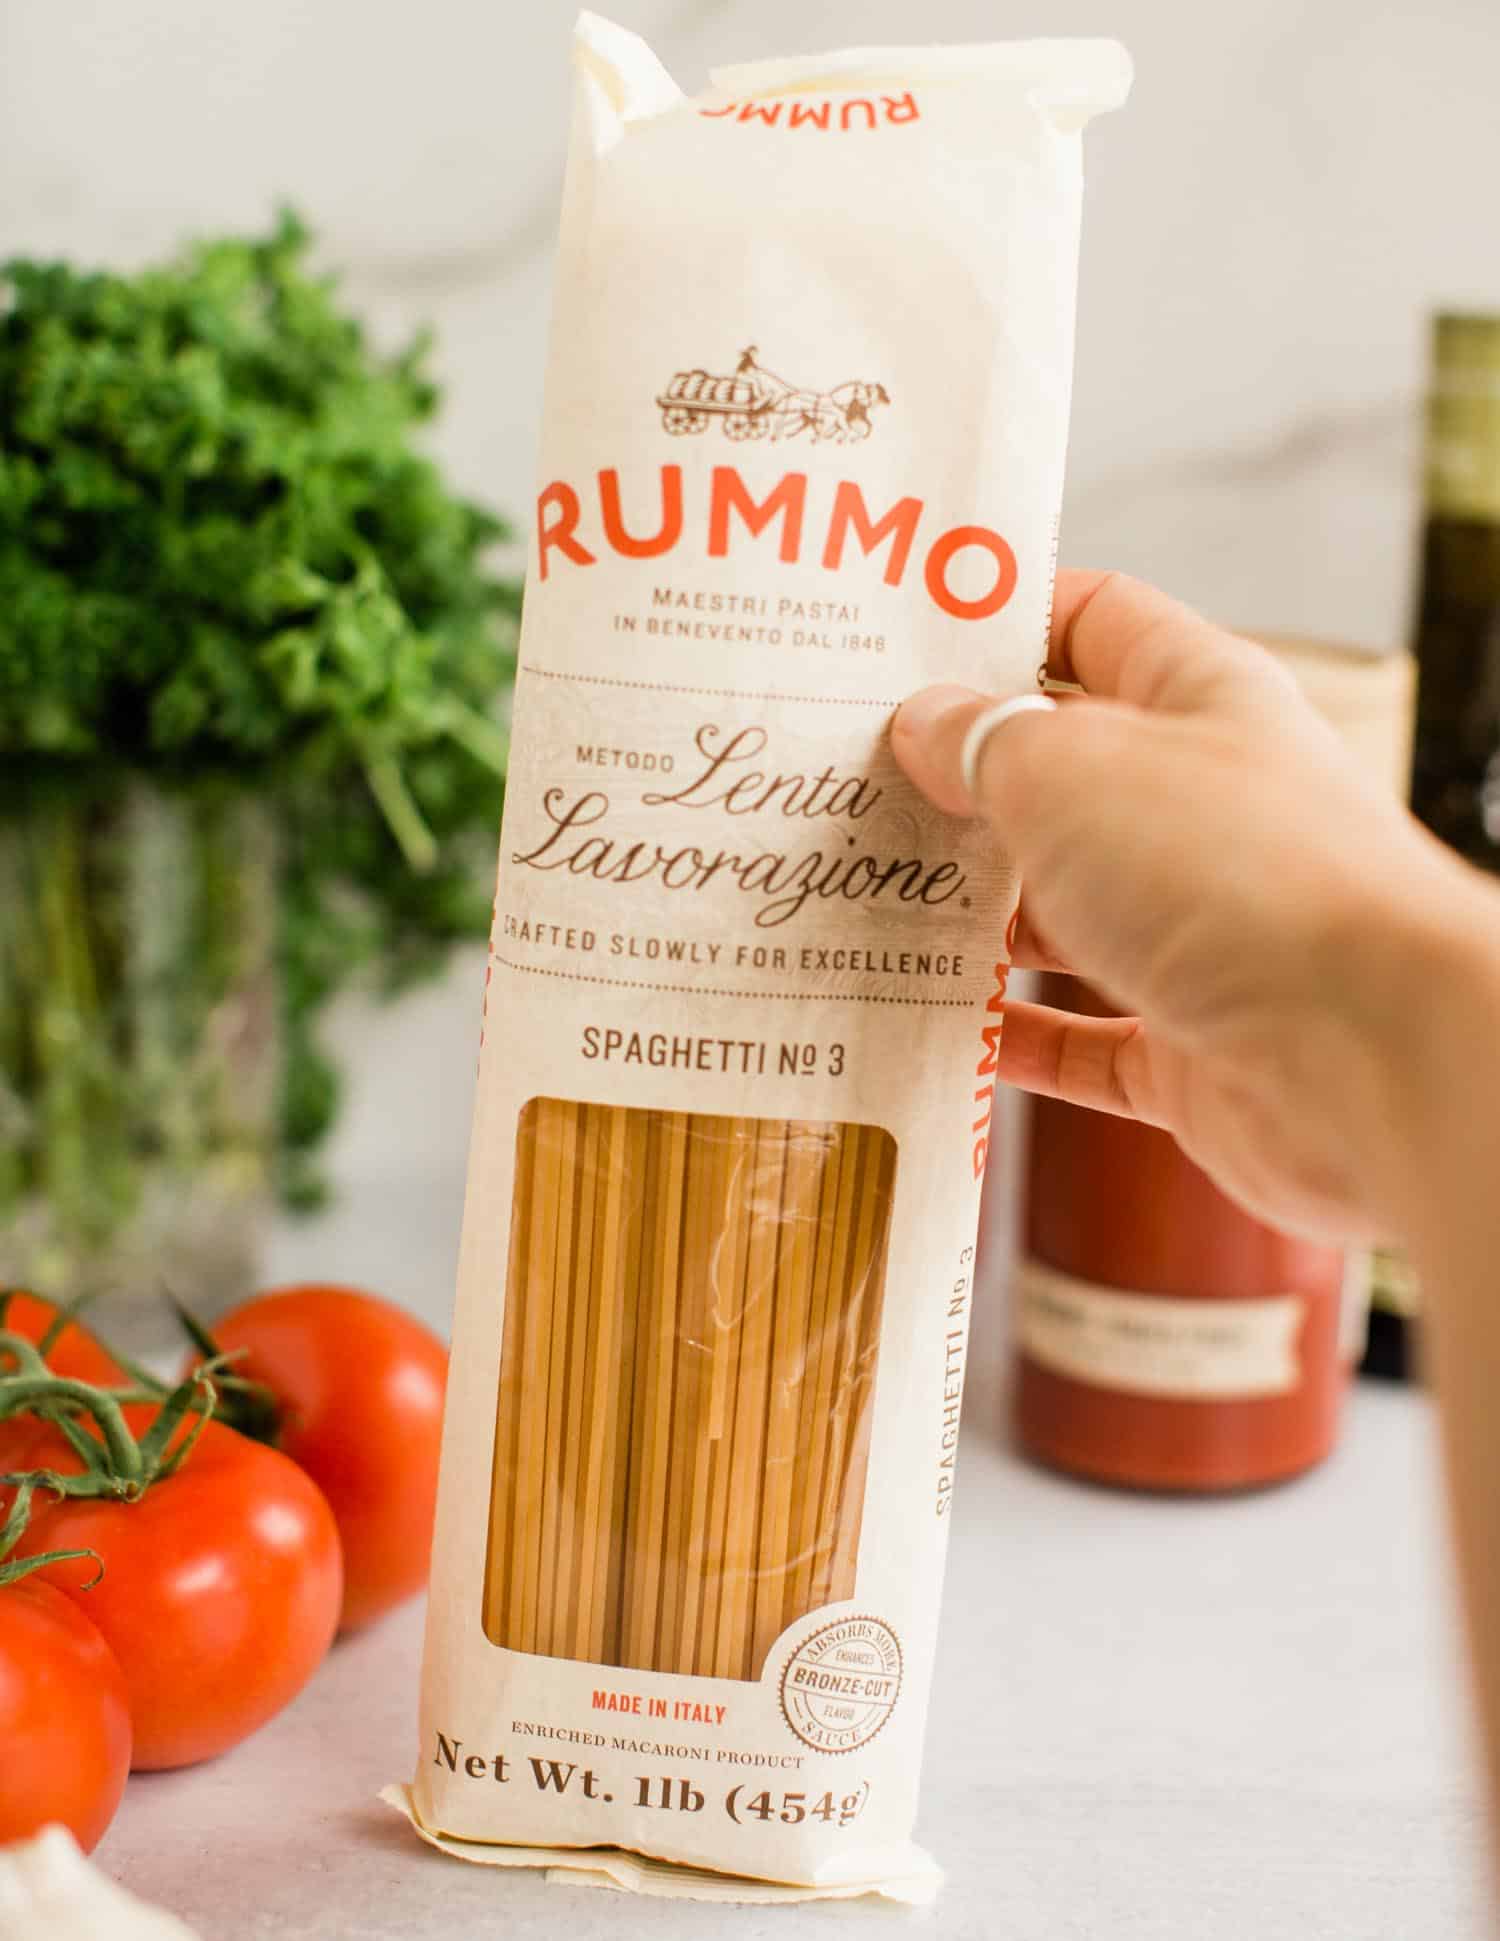 Holding up a package of spaghetti surrounded by tomatoes, parsley, and other traditional Italian ingredients. 